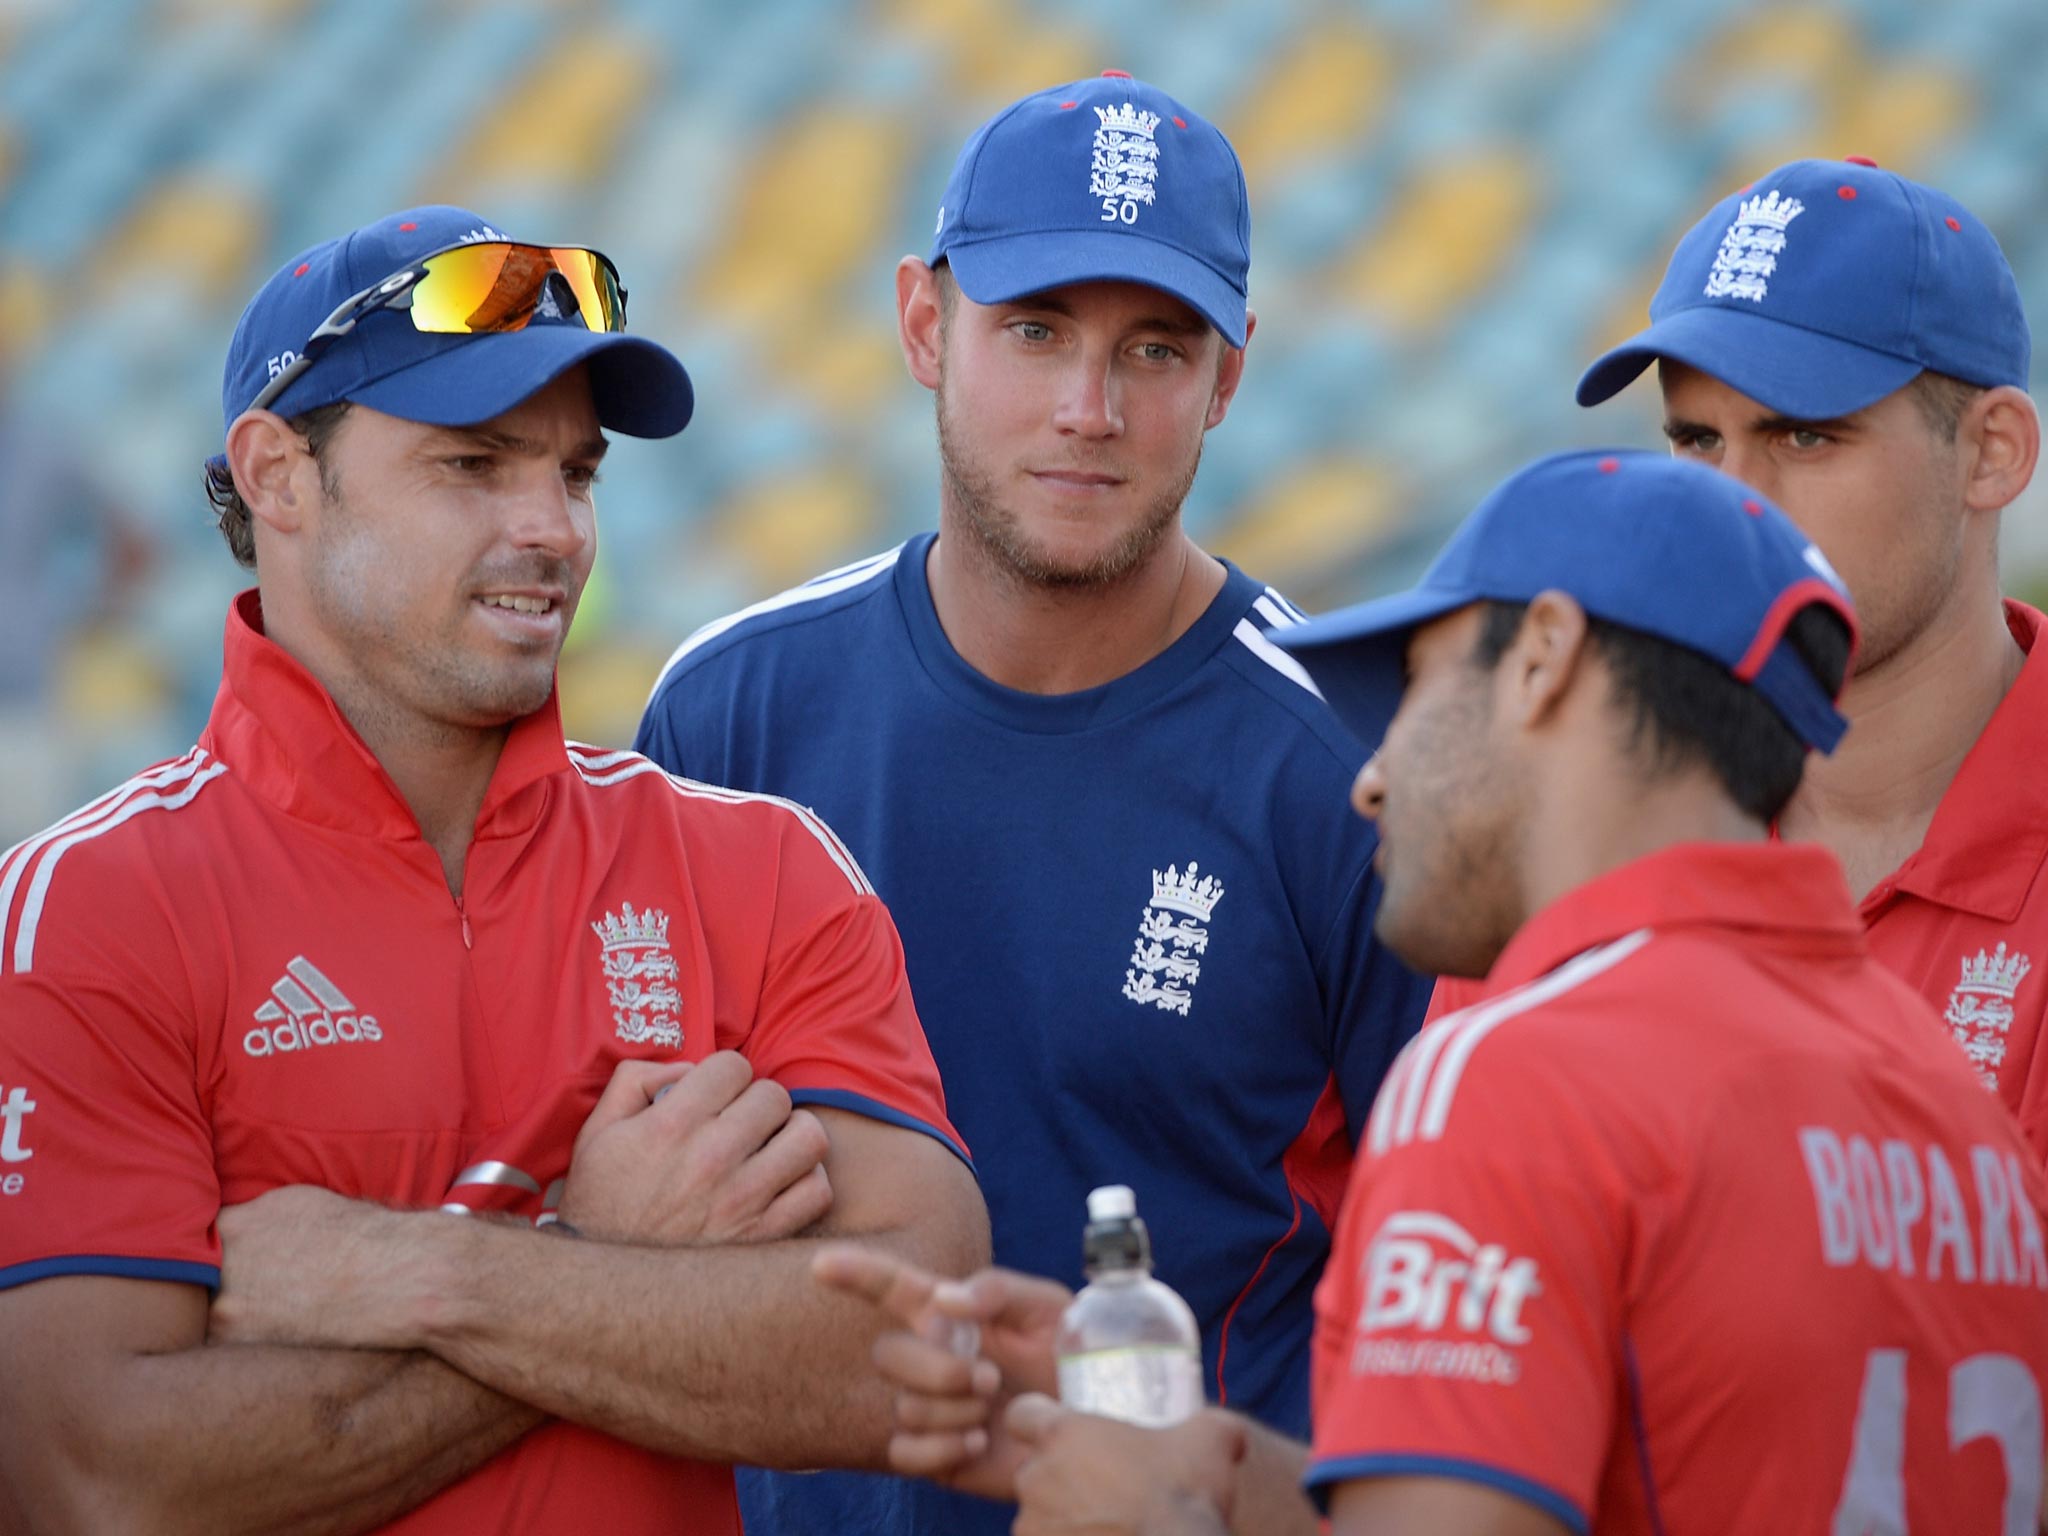 Stuart Broad could give England a boost ahead of their World Twenty20 campaign